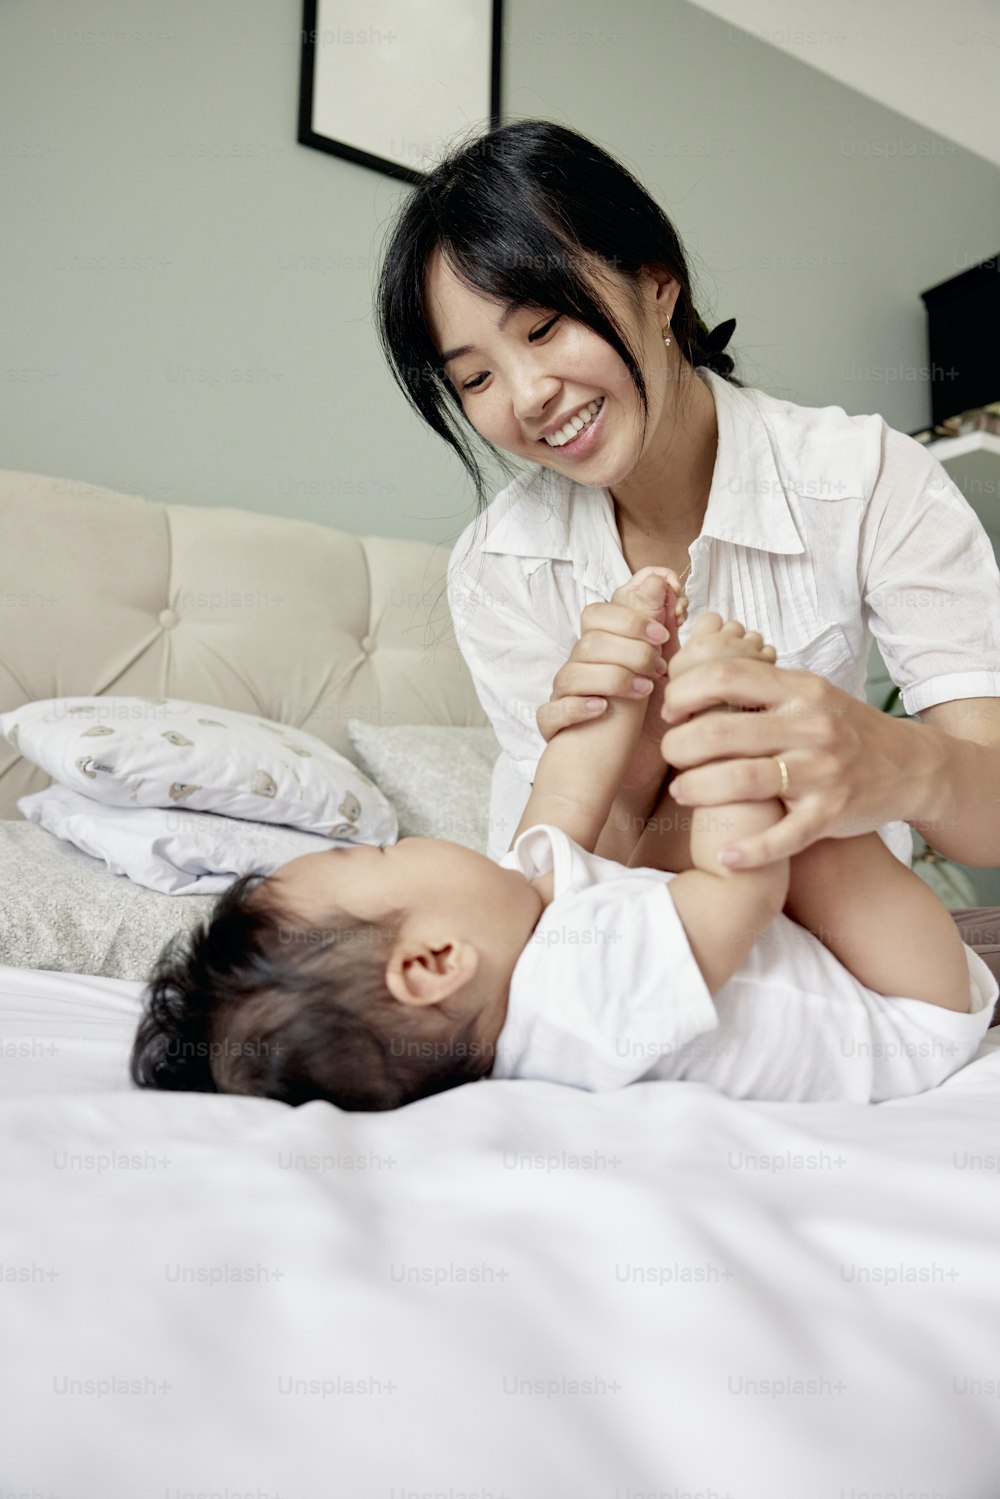 a woman playing with a baby on a bed